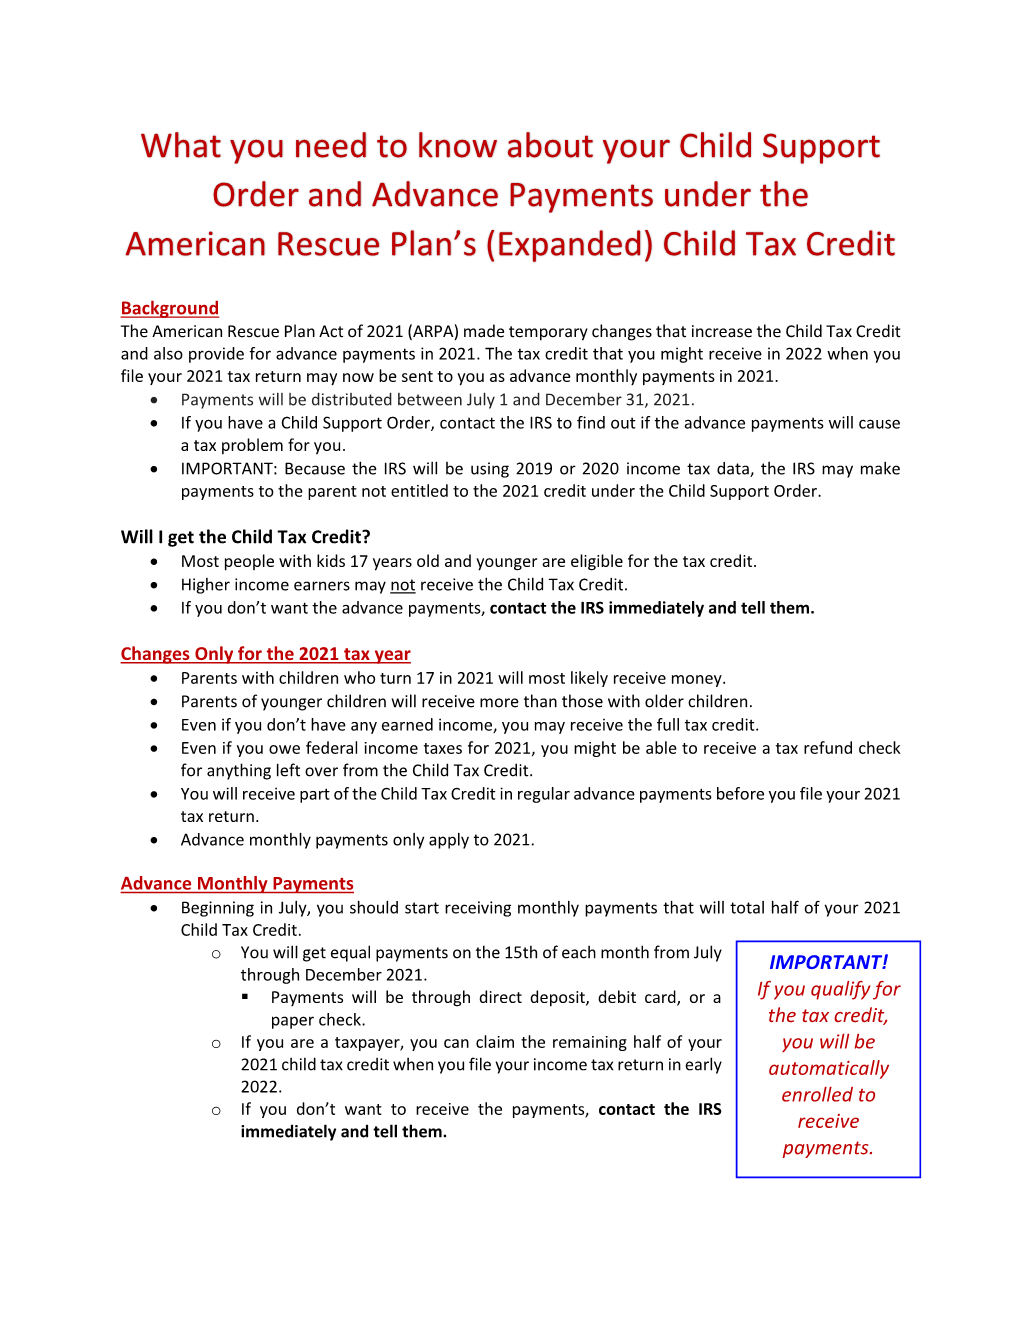 What You Need to Know About Your Child Support Order and Advance Payments Under the American Rescue Plan’S (Expanded) Child Tax Credit